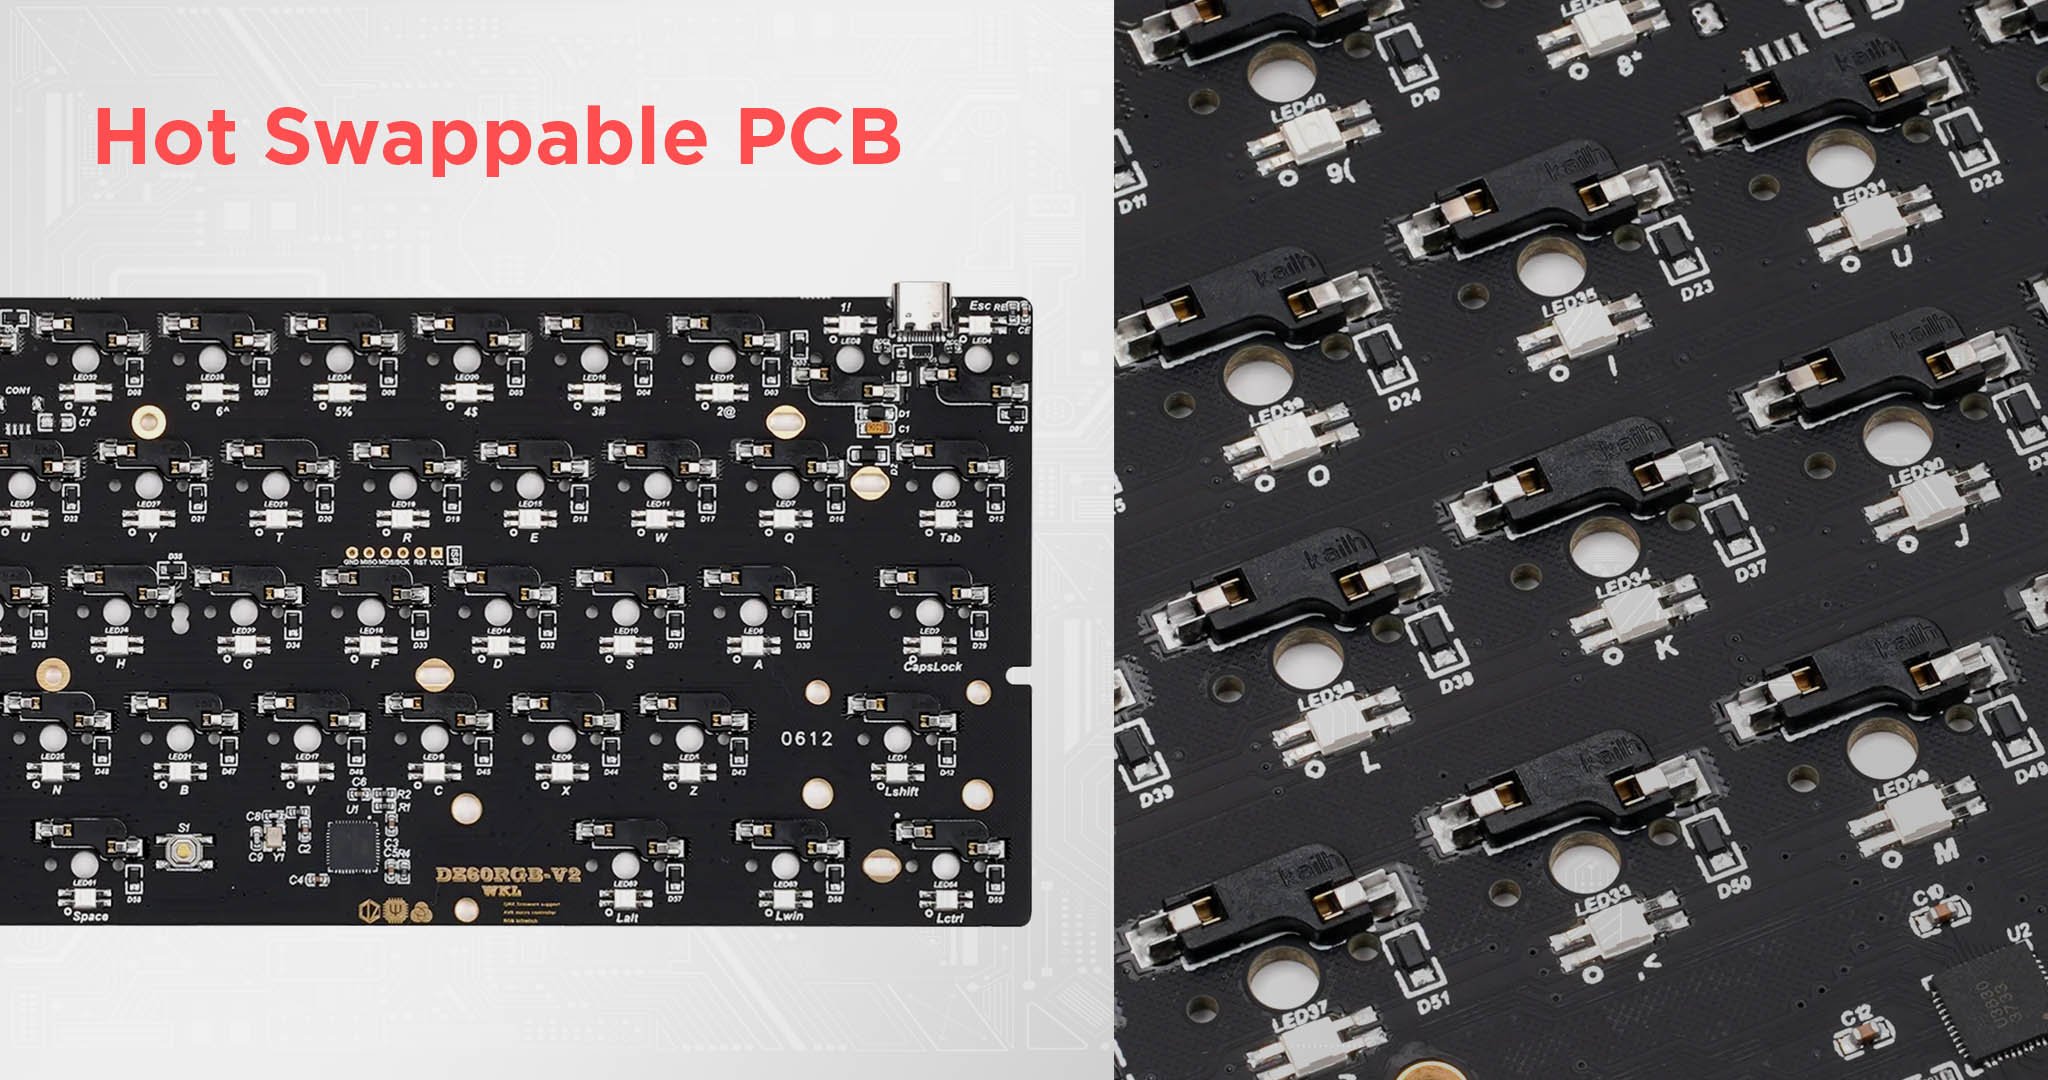 Hot Swappable PCB